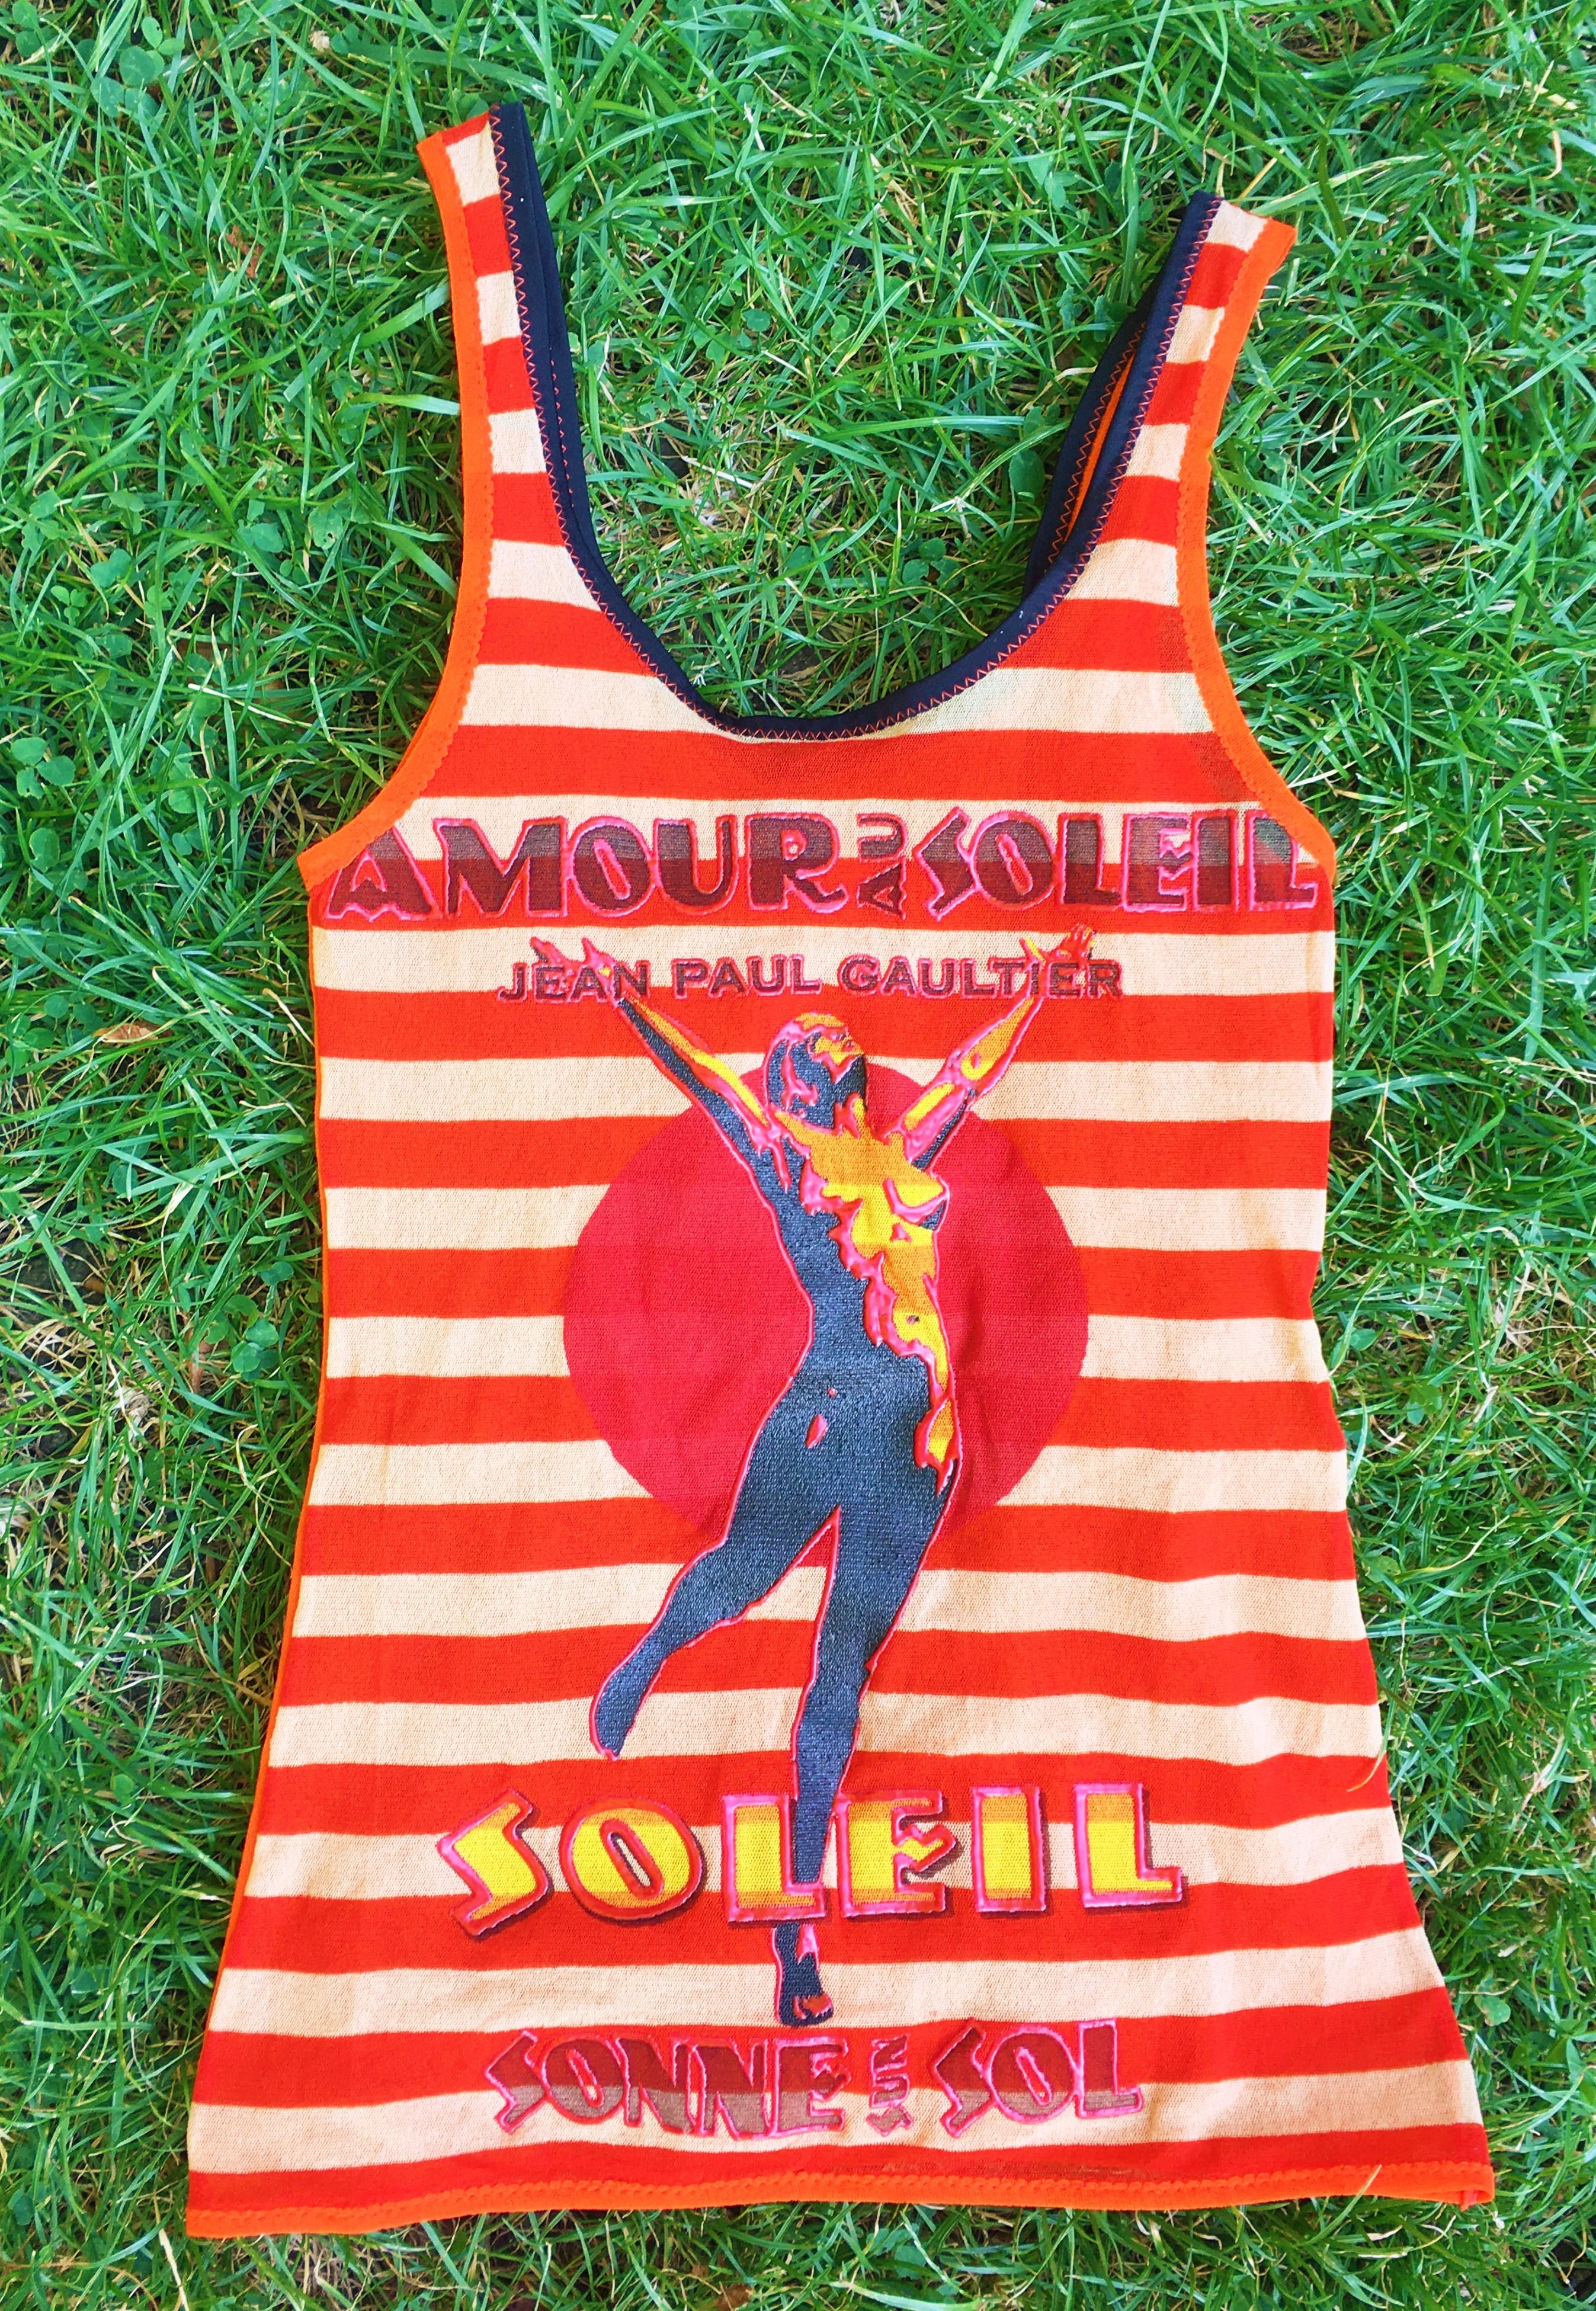 Amour au Soleil top by Jean Paul Gaultier!
Transparent :)

Text on the top: 
Jean Paul Gaultier
Amour au Soleil
Soleil 
Sonne Sun Sol

EXCELLENT condition!

SIZE
It fits from XS to medium.
Marked size: XS. Stretchy fabric!

Measurements unstretched